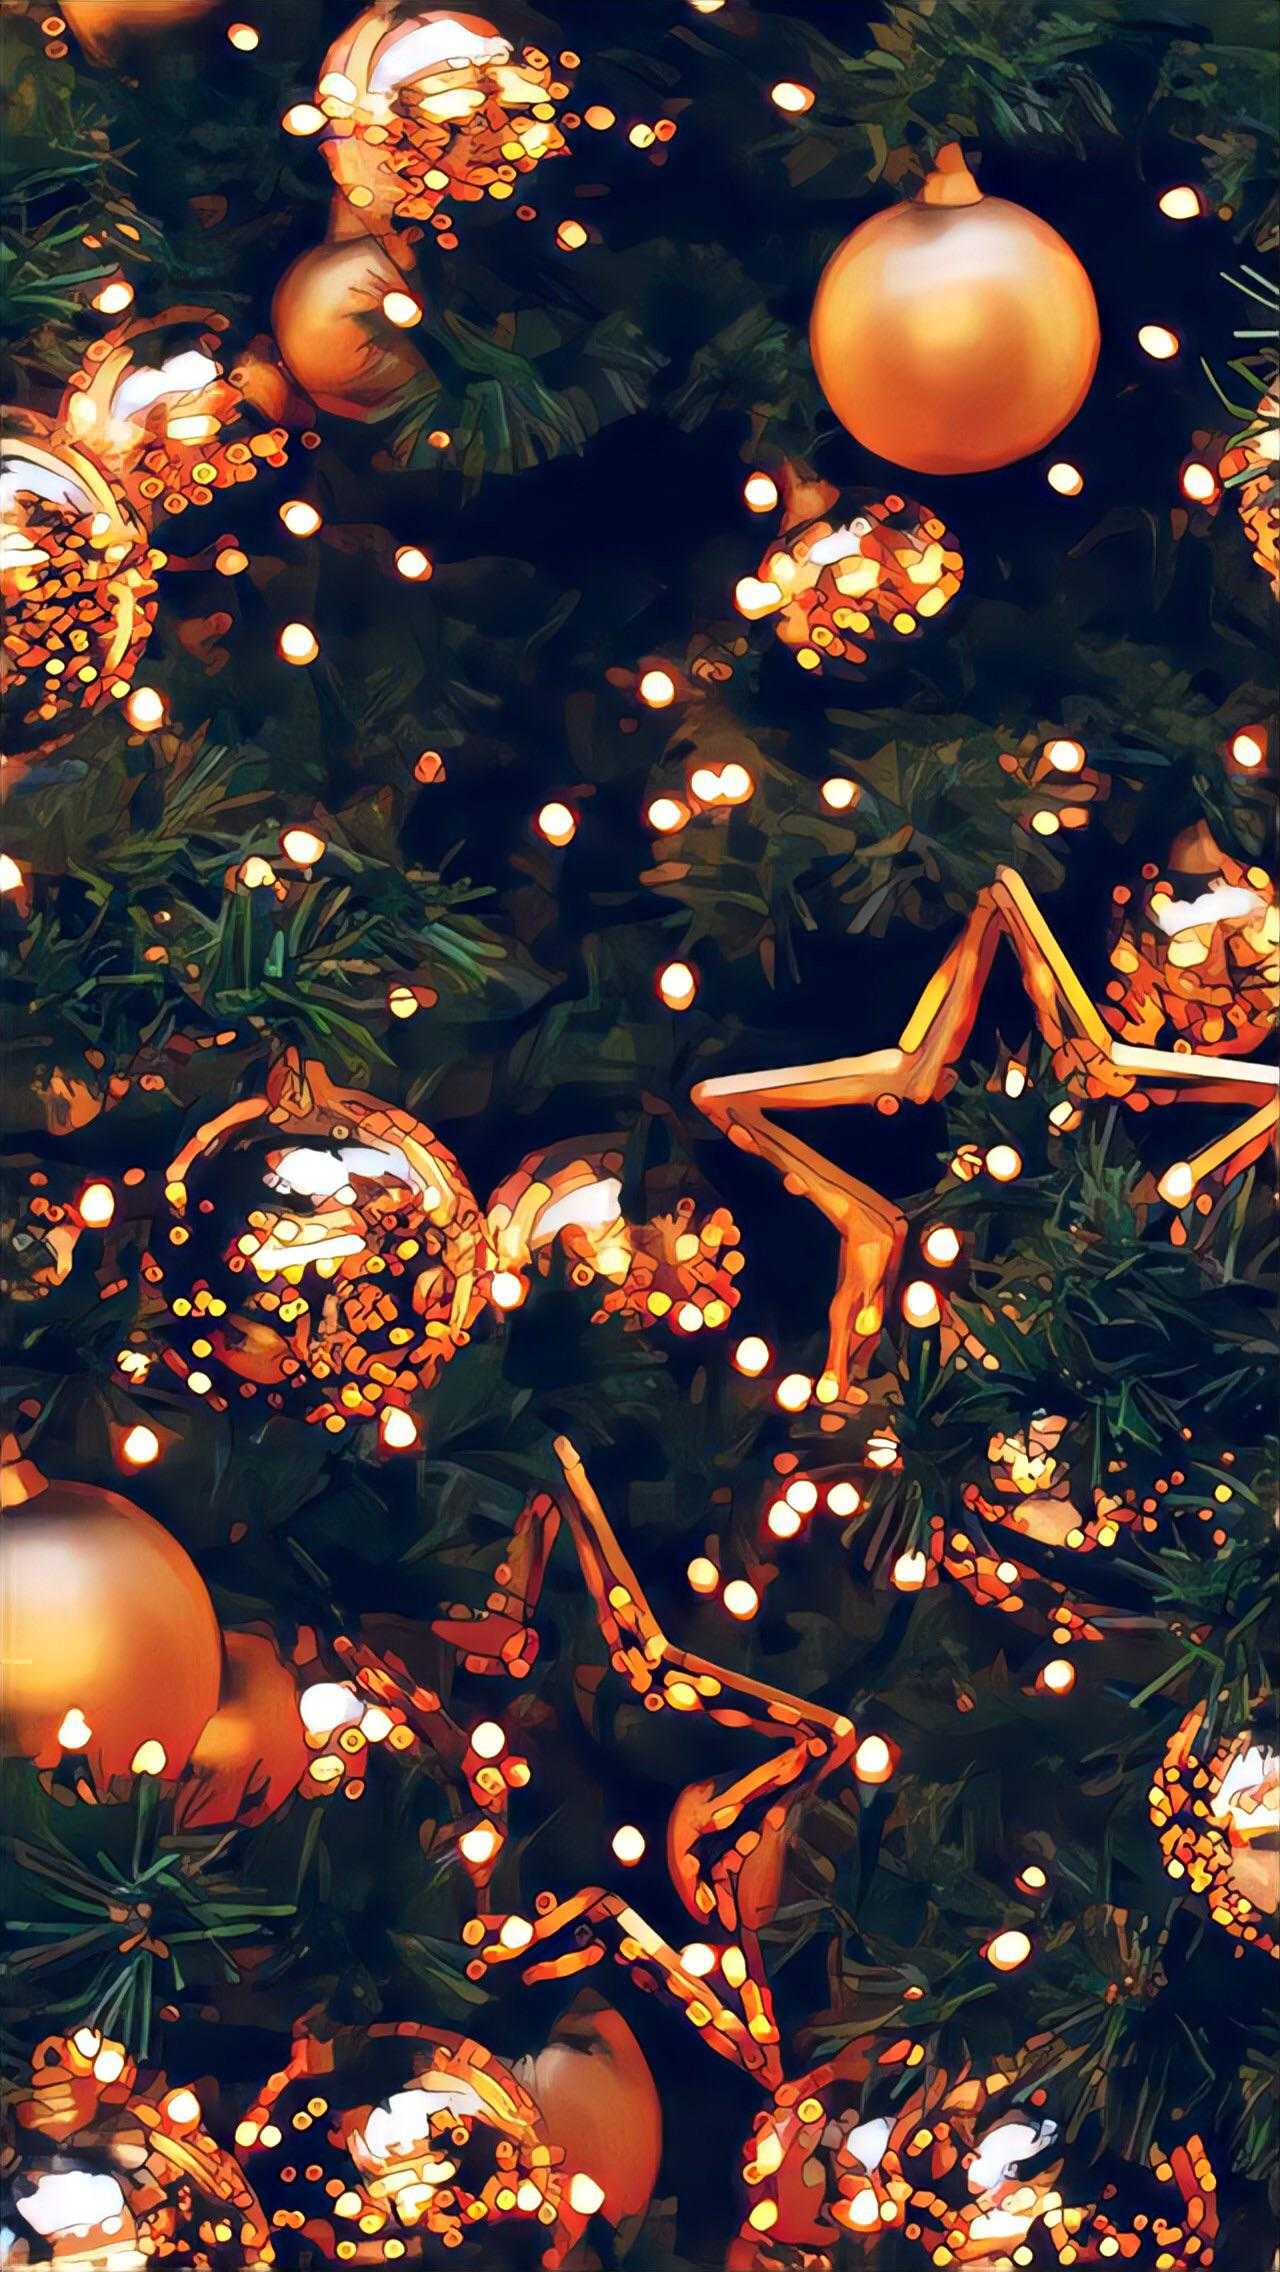 IPhone wallpaper of a close up of a Christmas tree with gold ornaments and lights. - Christmas lights